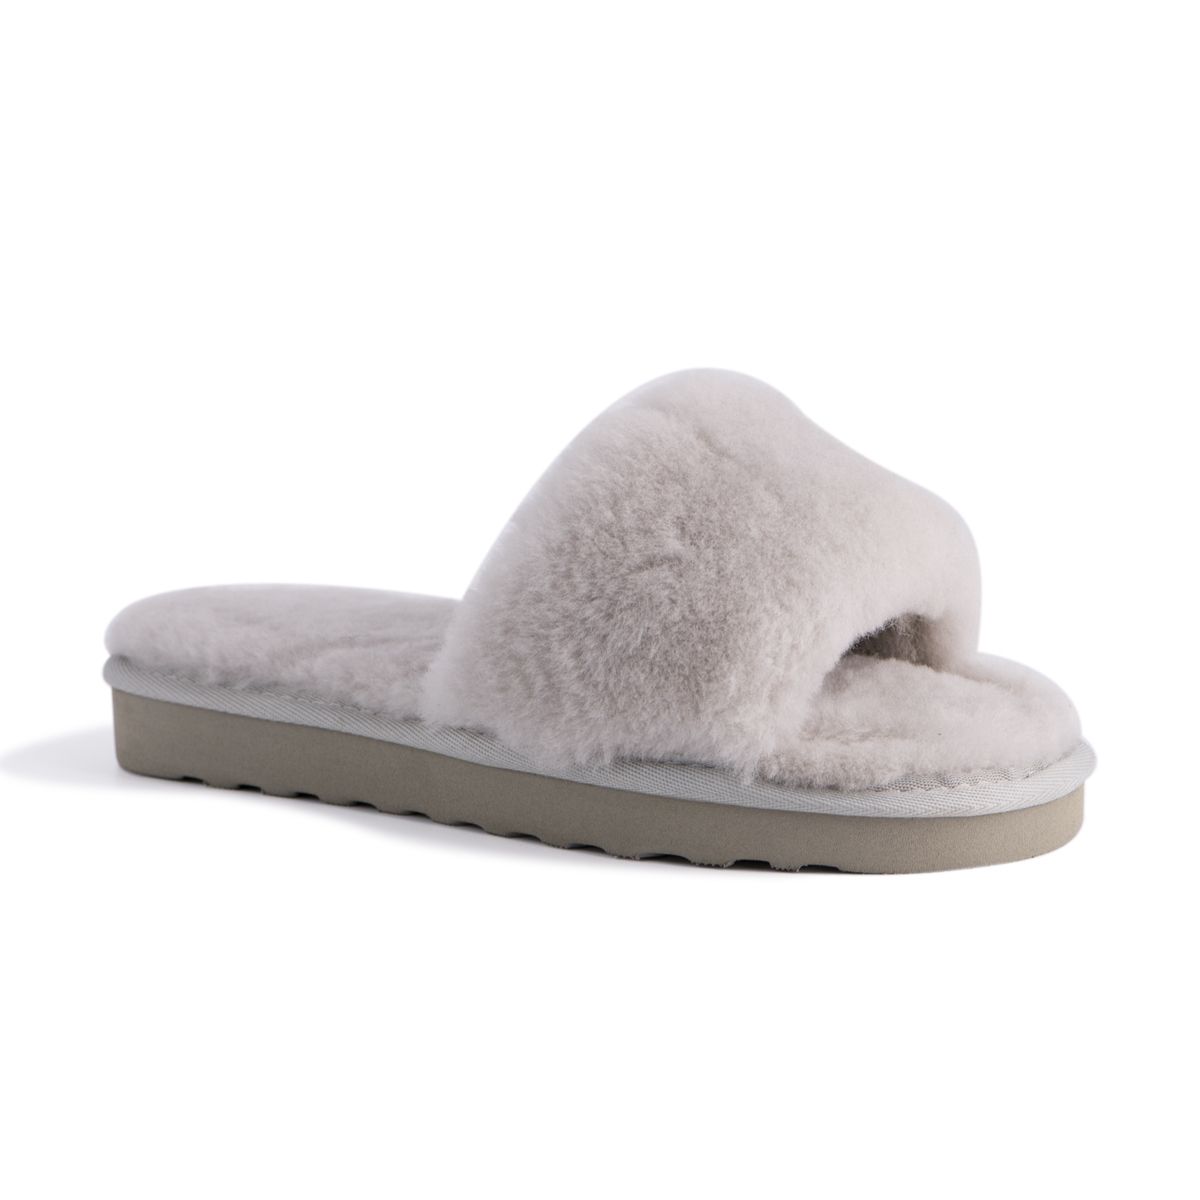 Plush premium 100% Australian sheepskin lining encompassing the whole slipper, allowing extra cushioning
Fine craftsmanship
Rubber base outsole that is both flexible and durable, also prevents slipping on wet surfaces
Provide extra warmth and would be the top choice to travel with, perfect to pair with your favourite PJs
100% brand new and high quality, comes in a branded box, suitable for gift